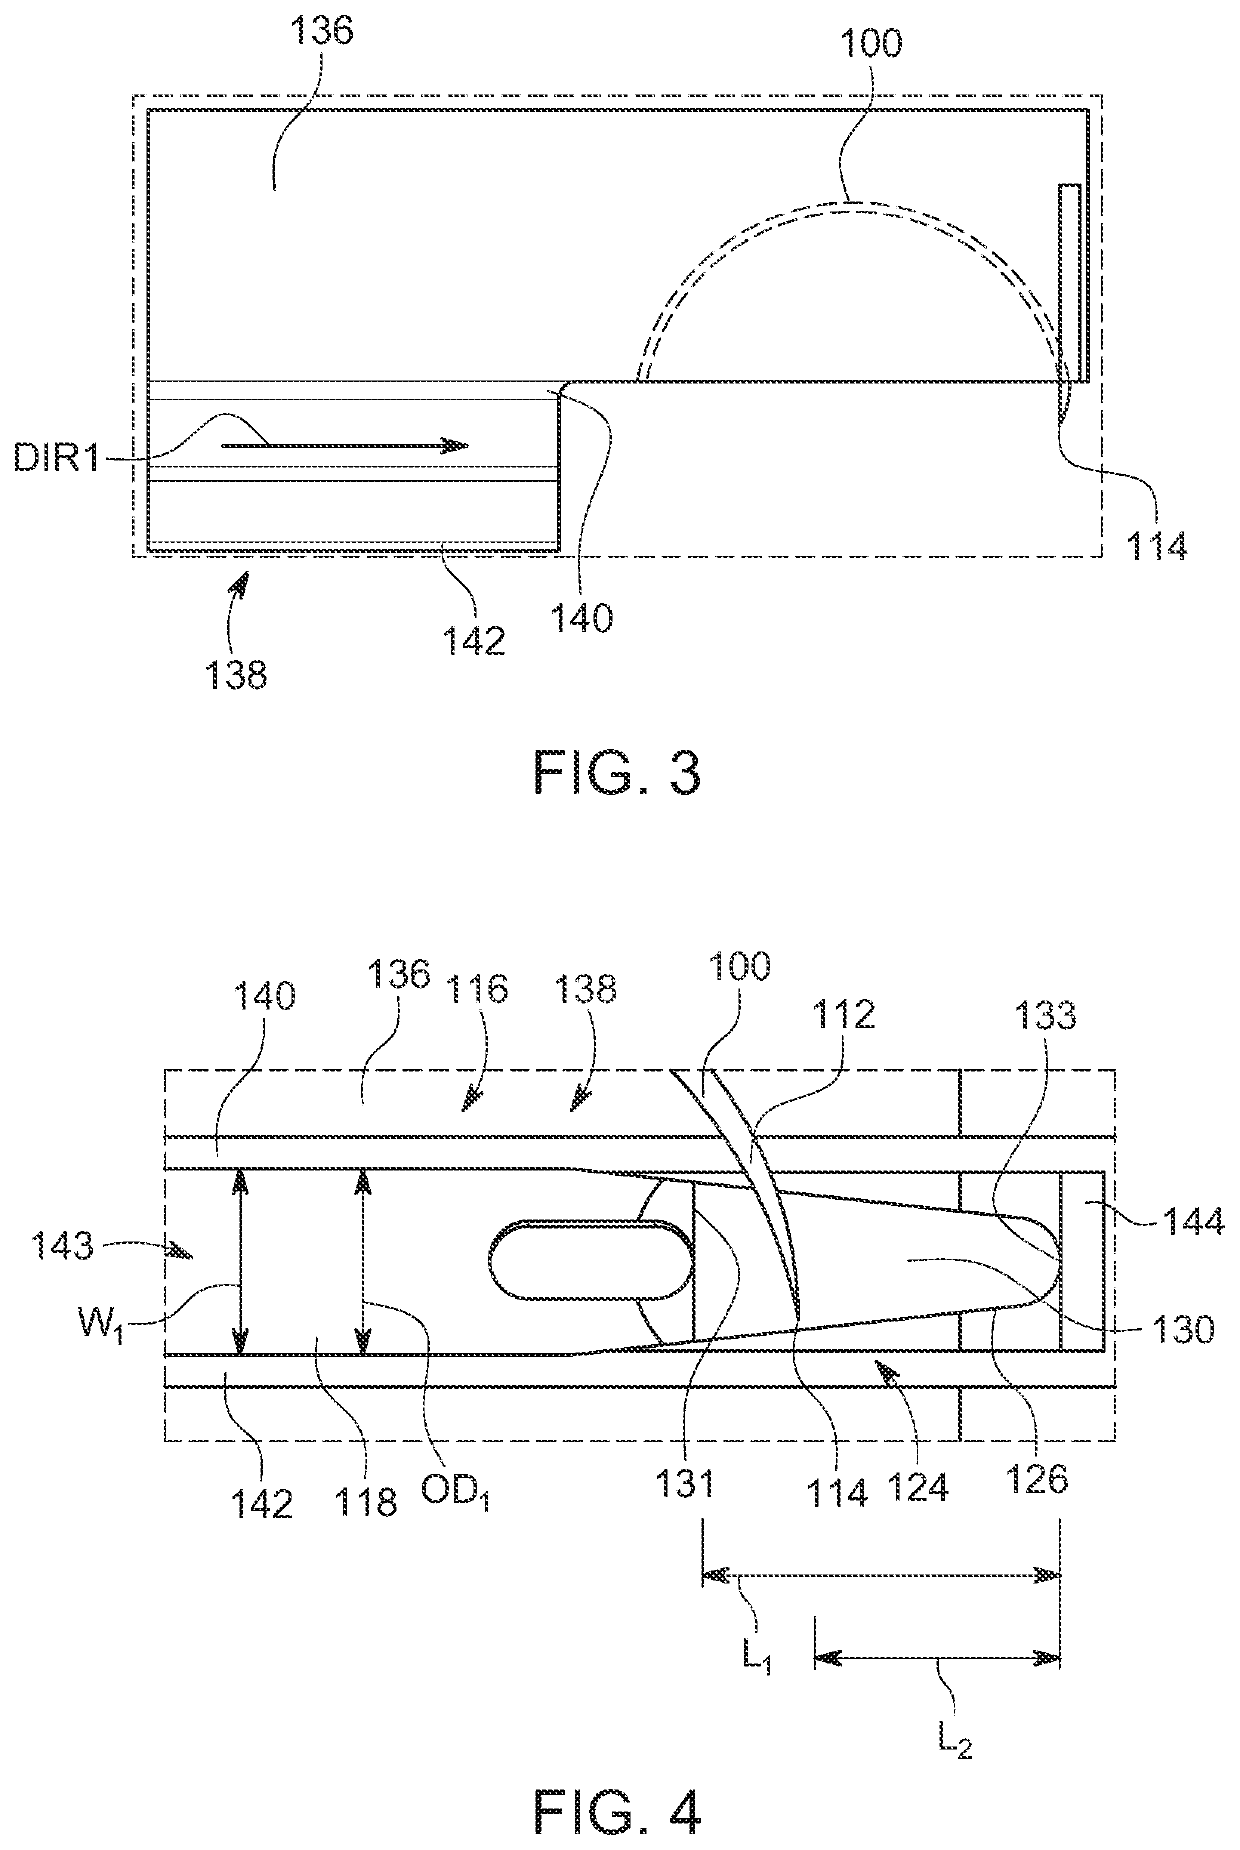 Suture needle packages for loading suture needles and methods of passing suture needles through trocars